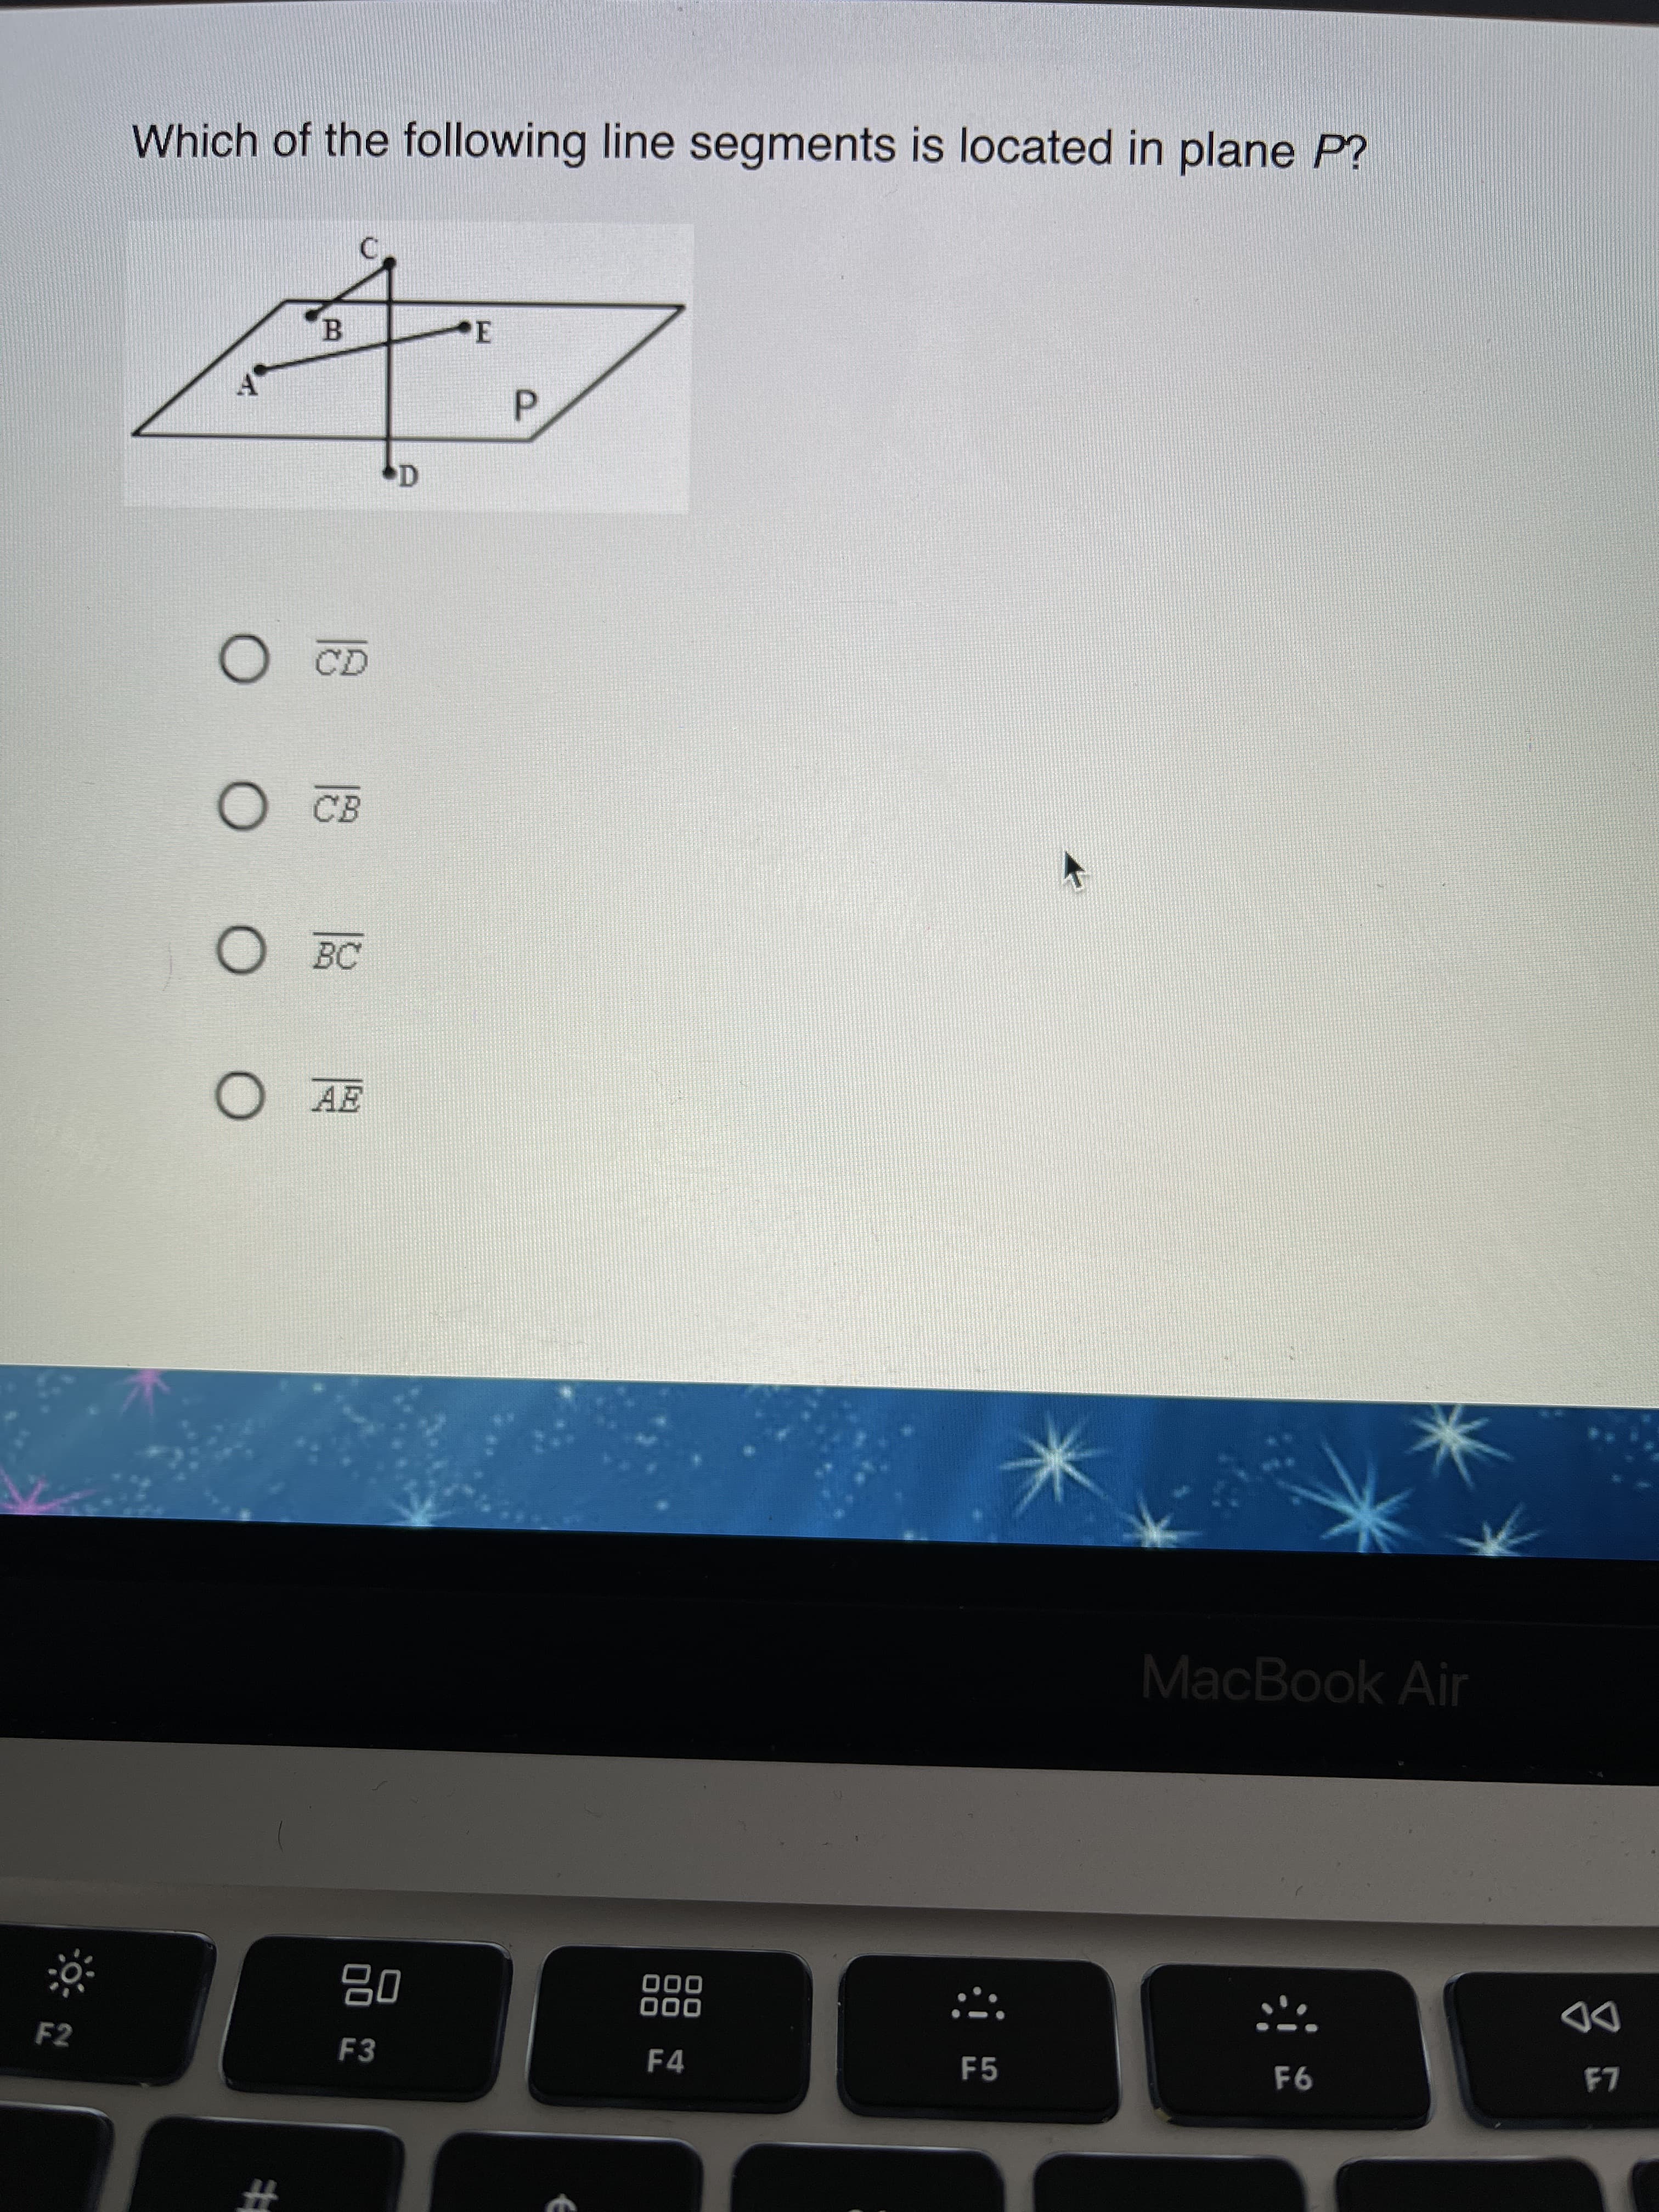 Which of the following line segments is located in plane P?
E
B.
CB
BC
OAE
MacBook Air
000
000
DD
08
F3
F4
F5
9 1
F2
23
